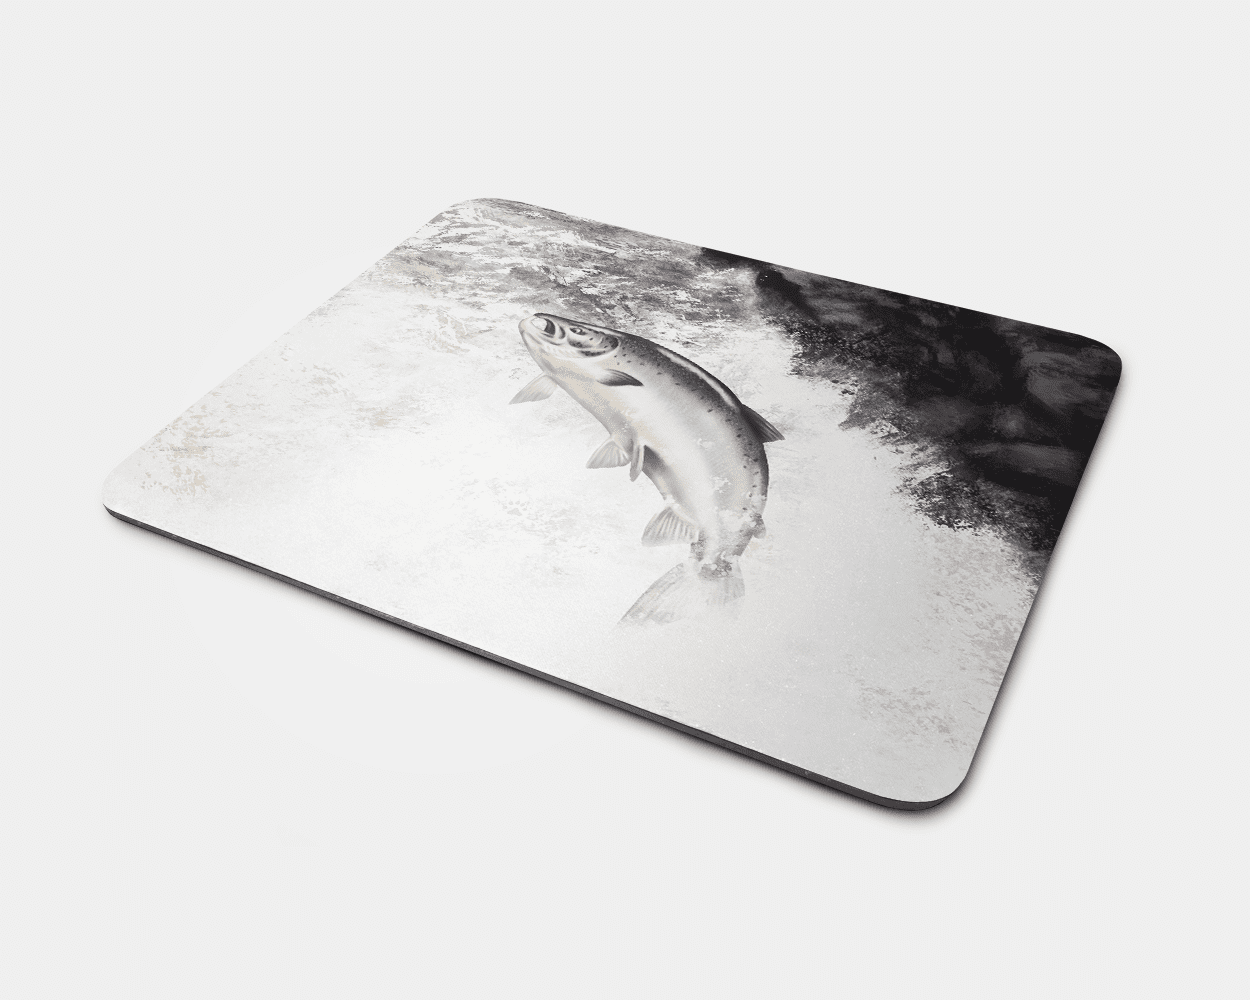 Country Images Personalised Fabric Custom Customised Mousemat Cheap Scotland UK Highland Collection Leaping Salmon Fishing Angling Fisher Angler Gift Gifts Ideas Idea